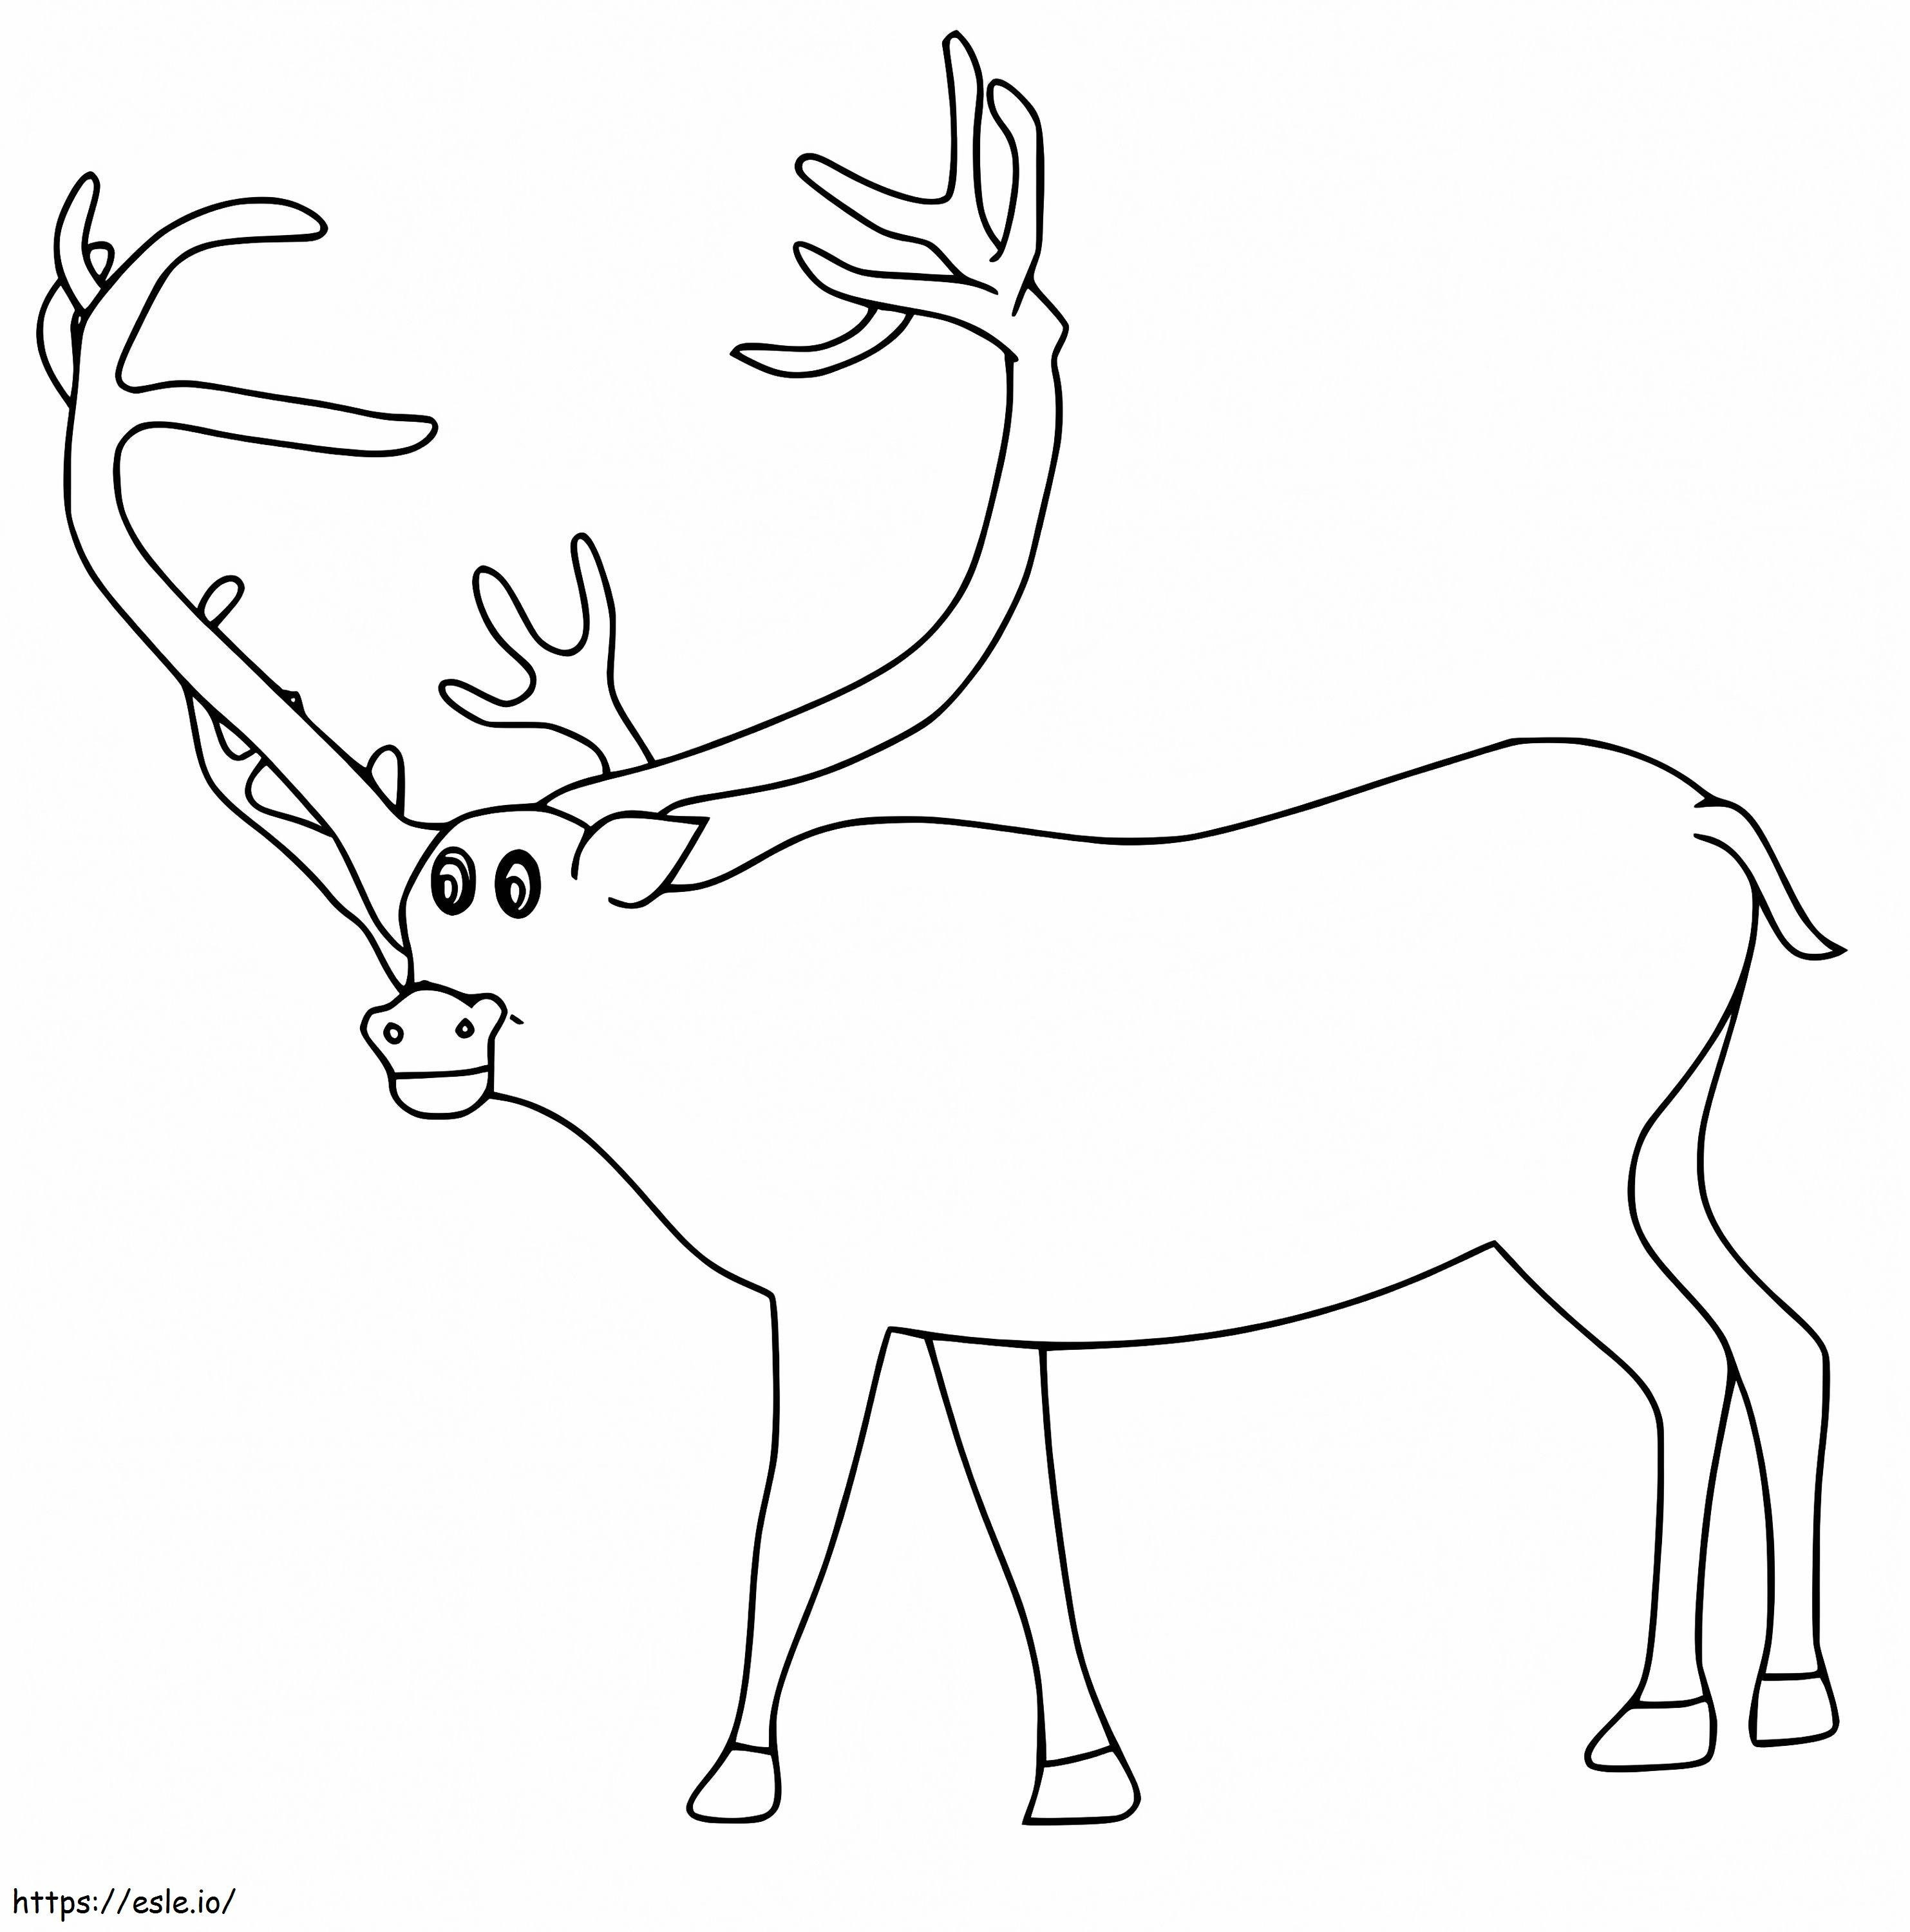 Funny Red Deer coloring page